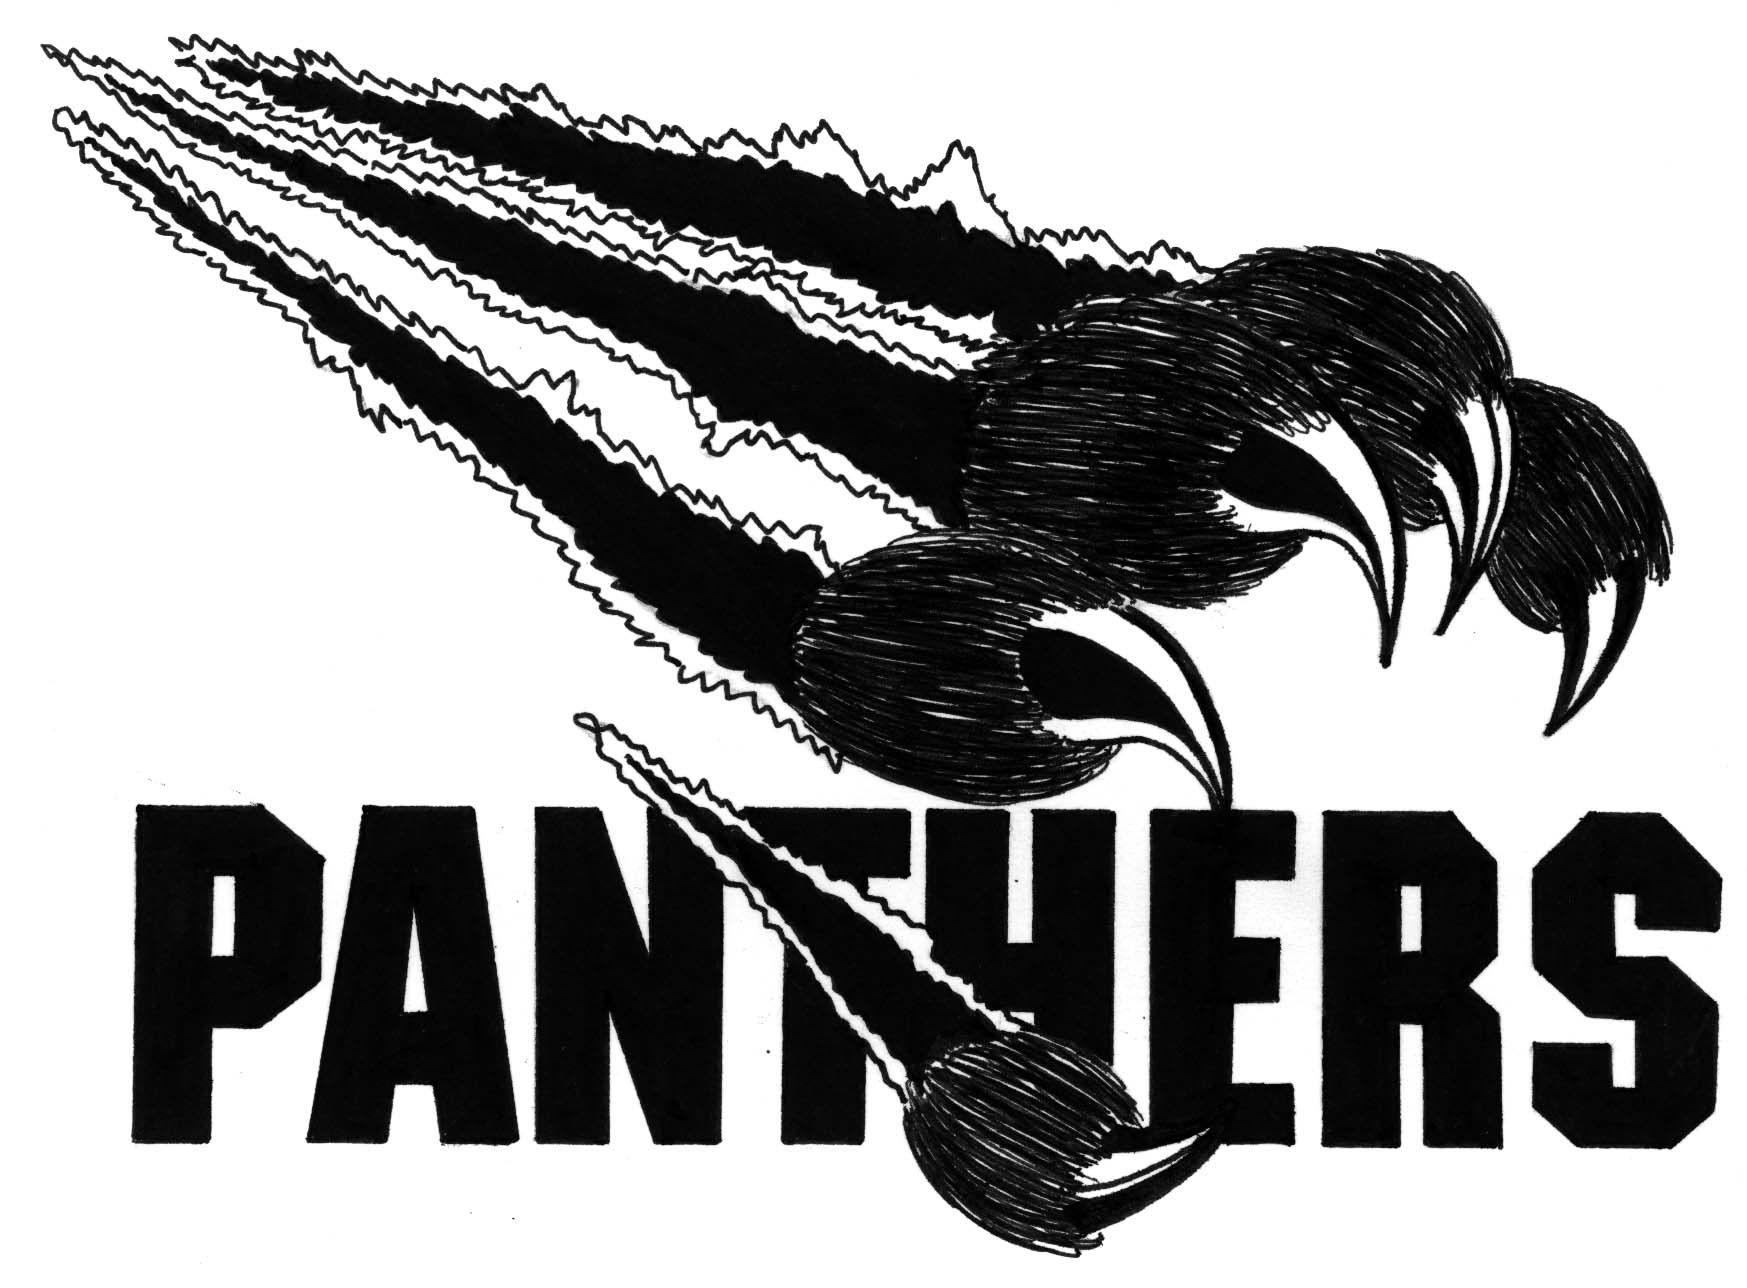 Black Panther Red Outline Logo - Panther Red Outline Logos